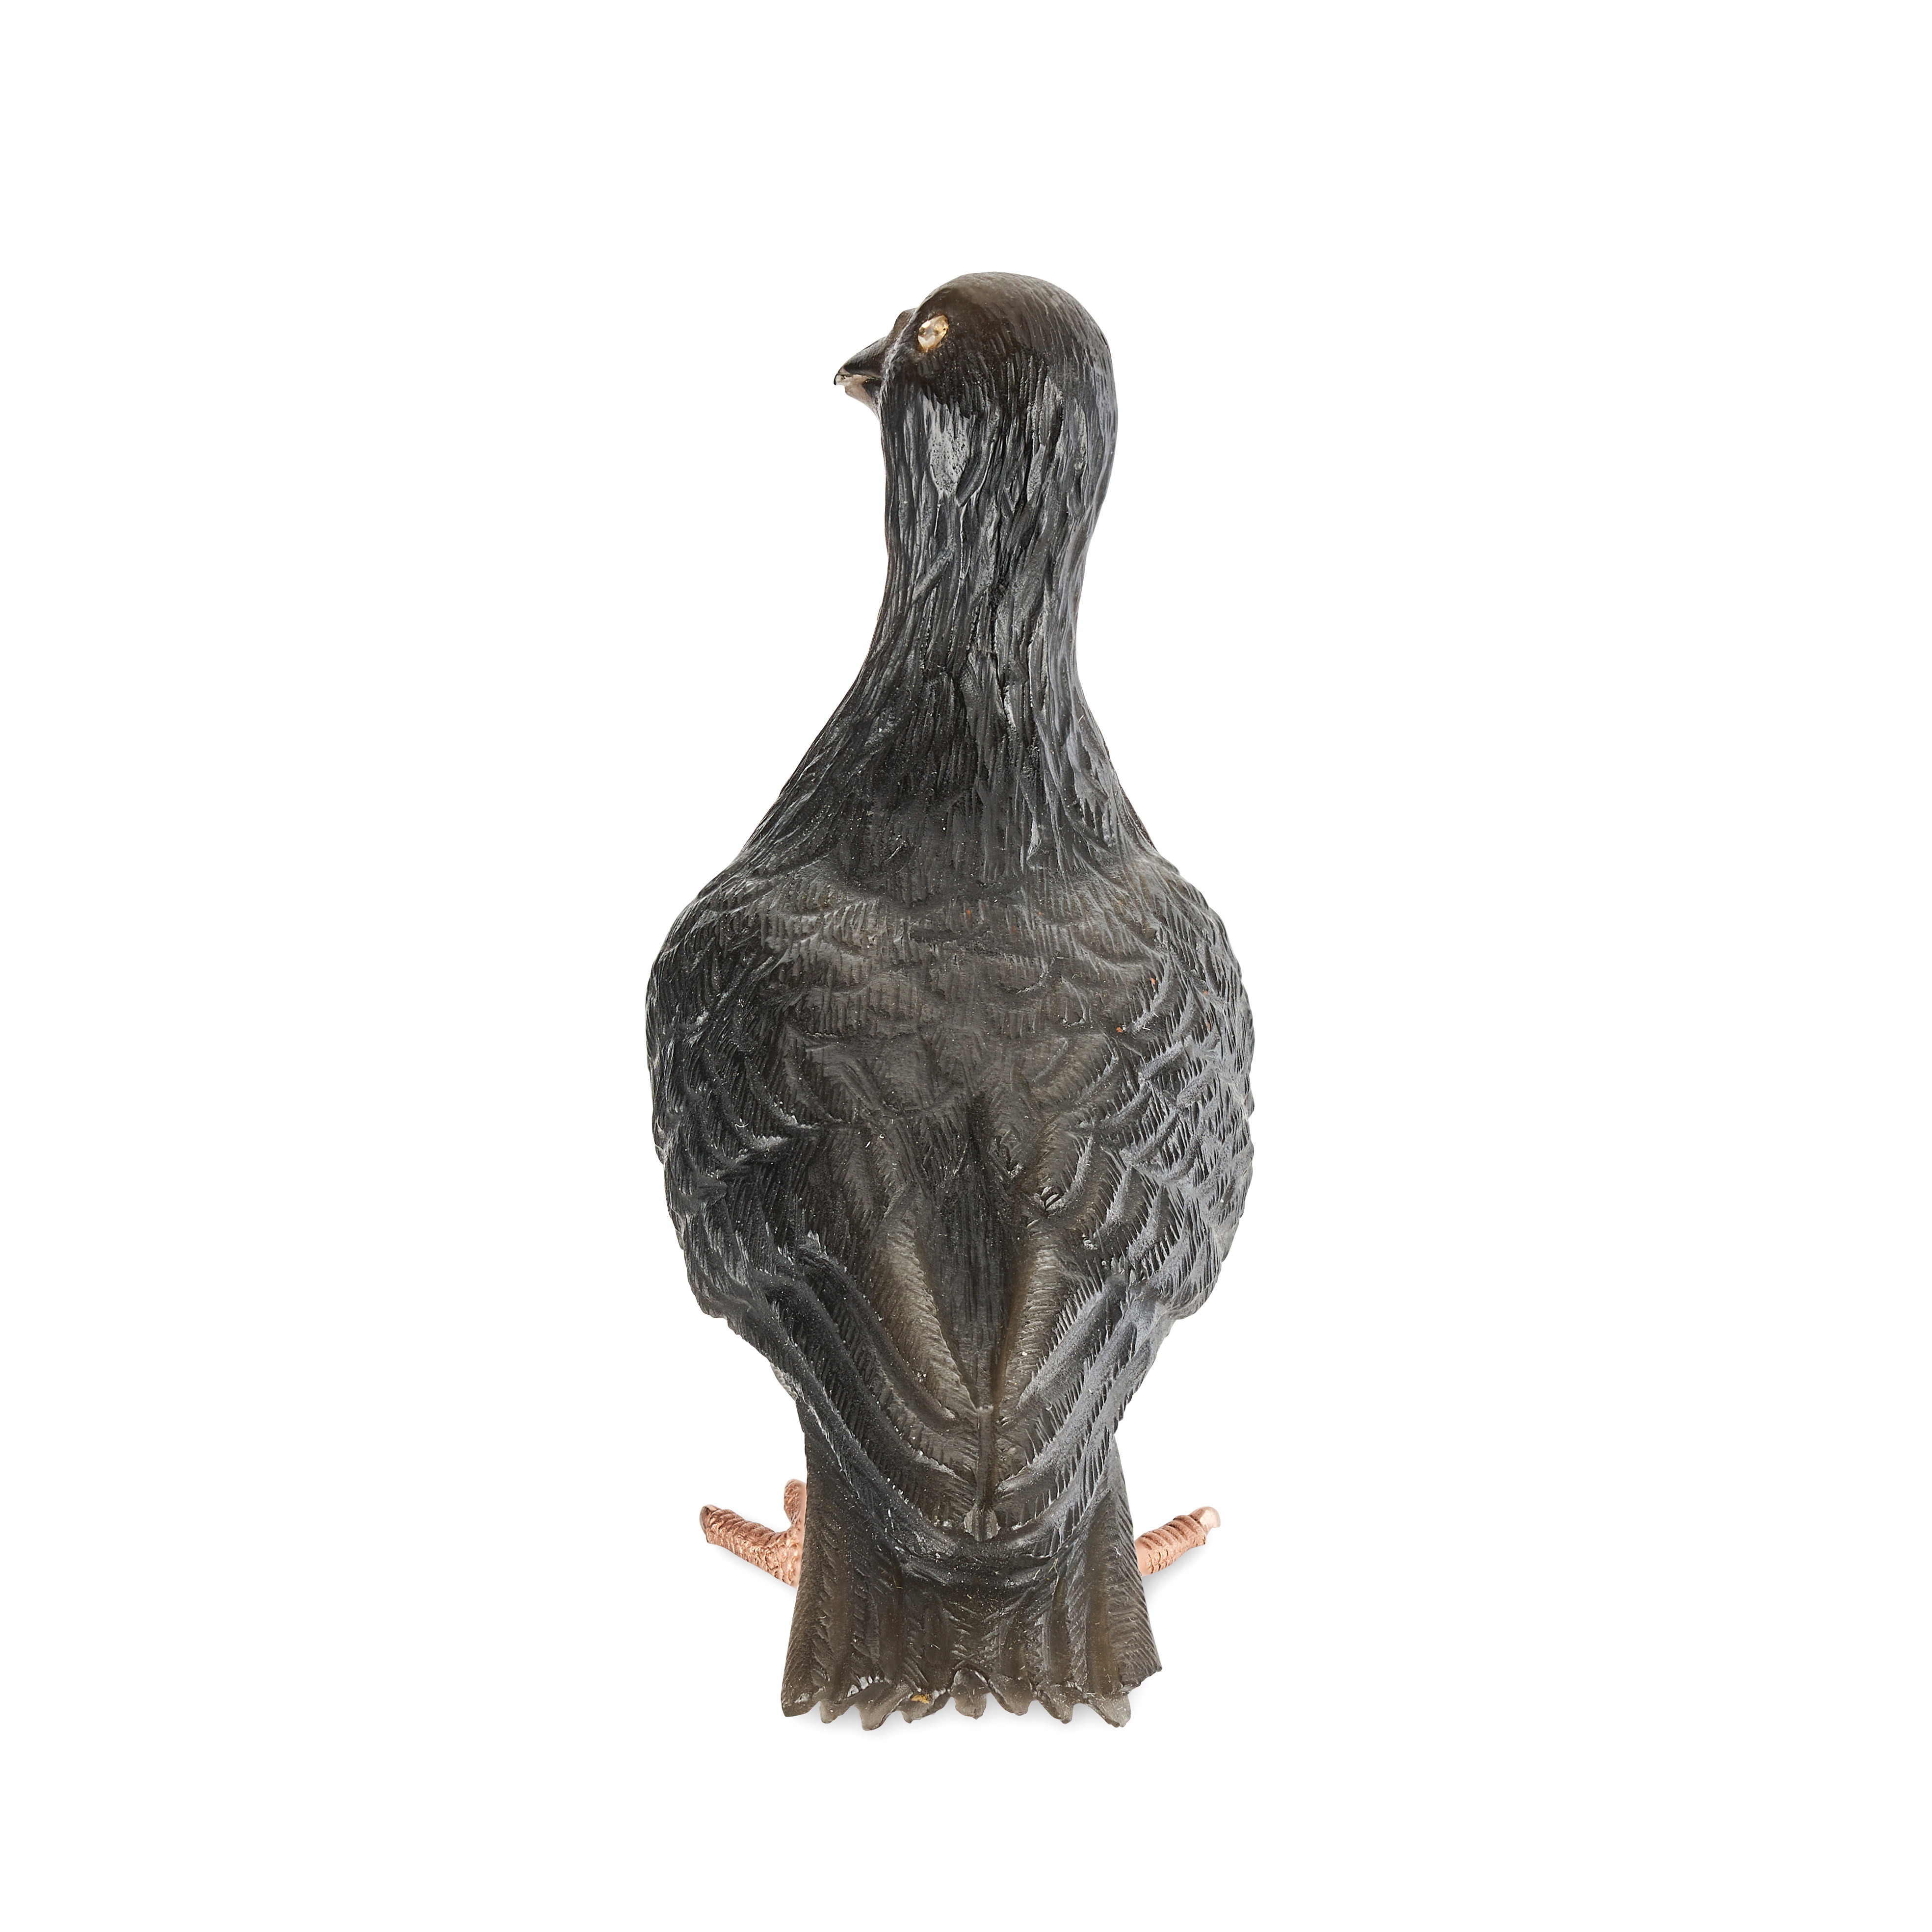 FABERGE, AN IMPORTANT IMPERIAL JEWELLED GOLD MOUNTED CARVED OBSIDIAN MODEL OF A CARRIER PIGEON, S... - Image 5 of 11